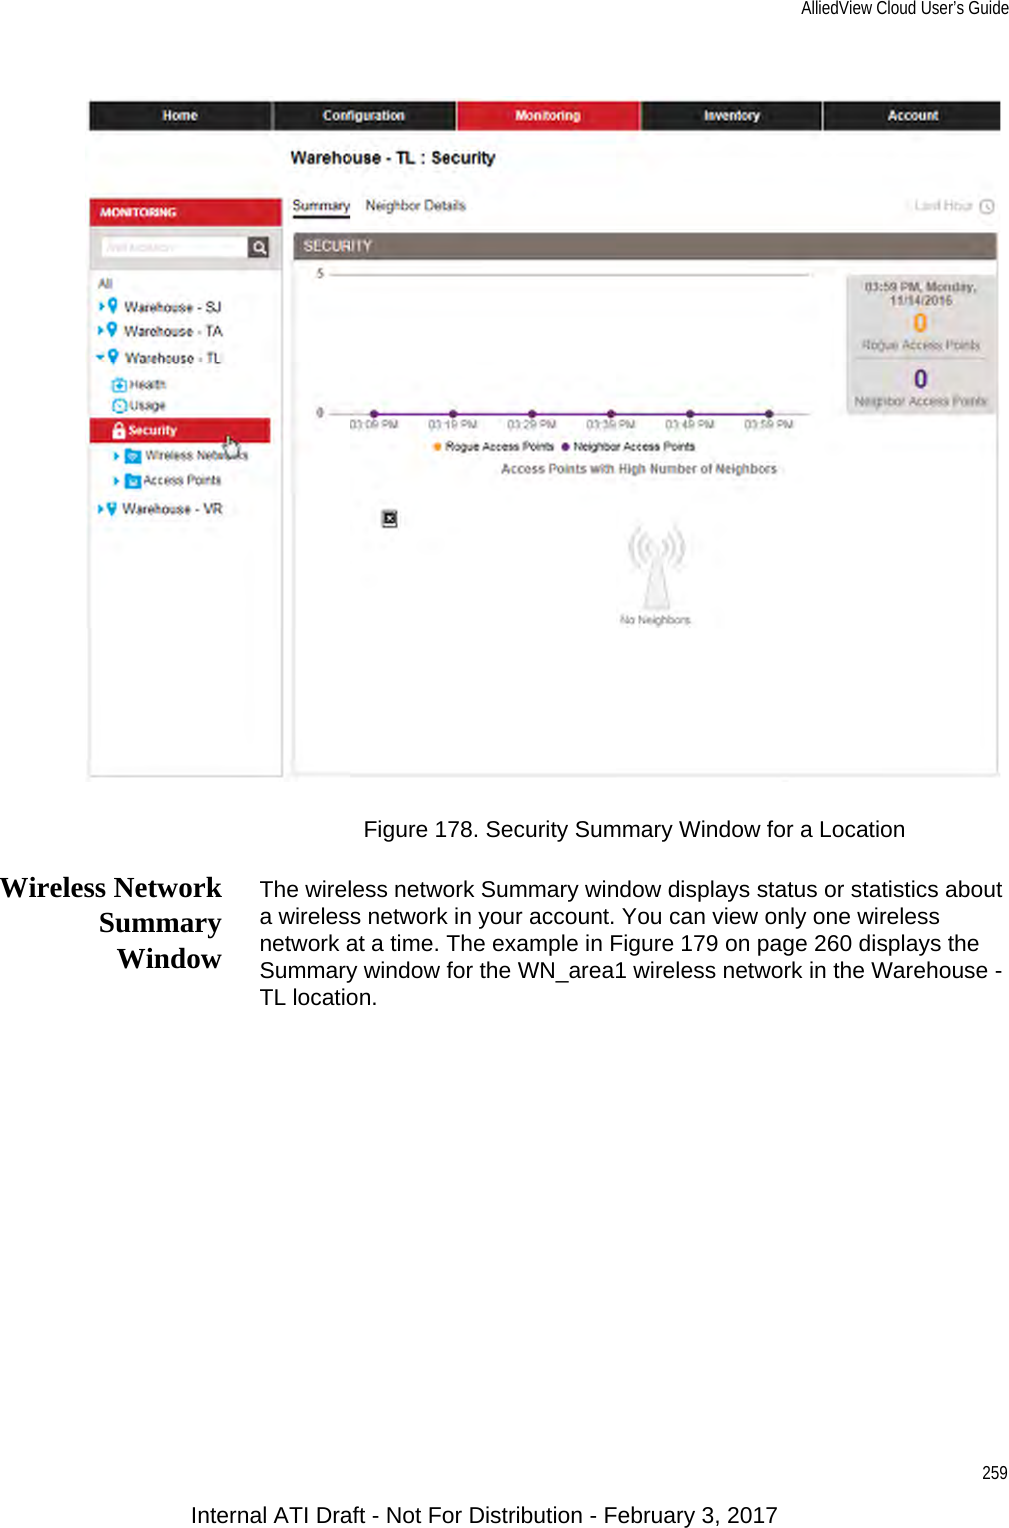 AlliedView Cloud User’s Guide259Figure 178. Security Summary Window for a LocationWireless NetworkSummaryWindowThe wireless network Summary window displays status or statistics about a wireless network in your account. You can view only one wireless network at a time. The example in Figure 179 on page 260 displays the Summary window for the WN_area1 wireless network in the Warehouse - TL location.Internal ATI Draft - Not For Distribution - February 3, 2017